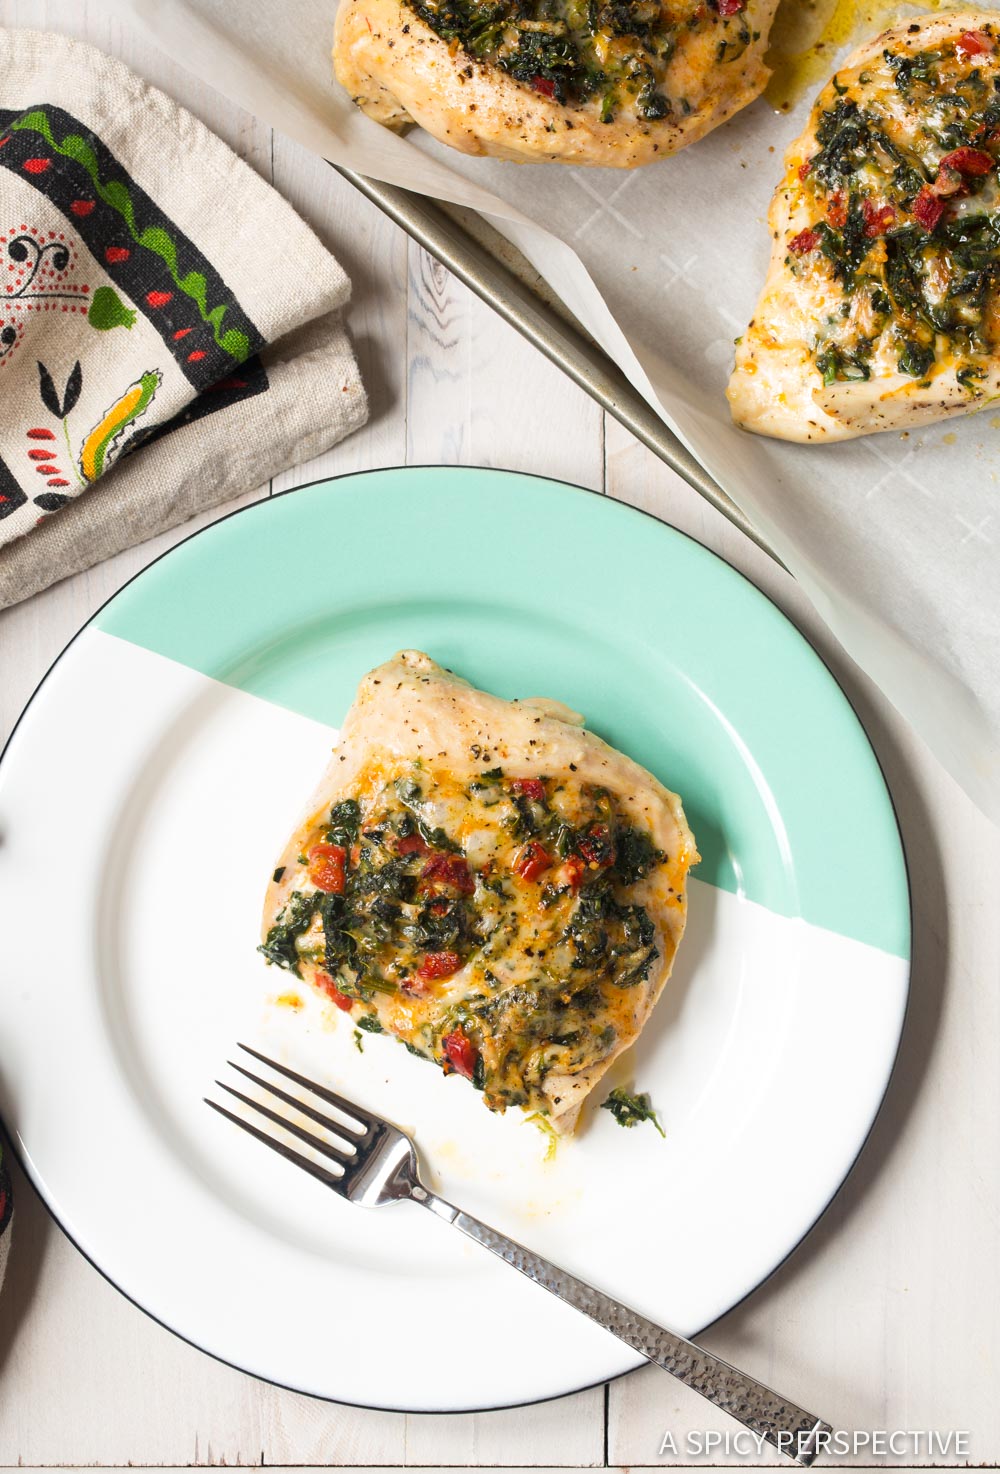 The Best Cheesy Spinach Stuffed Chicken Breasts Recipe #ASpicyPerspective